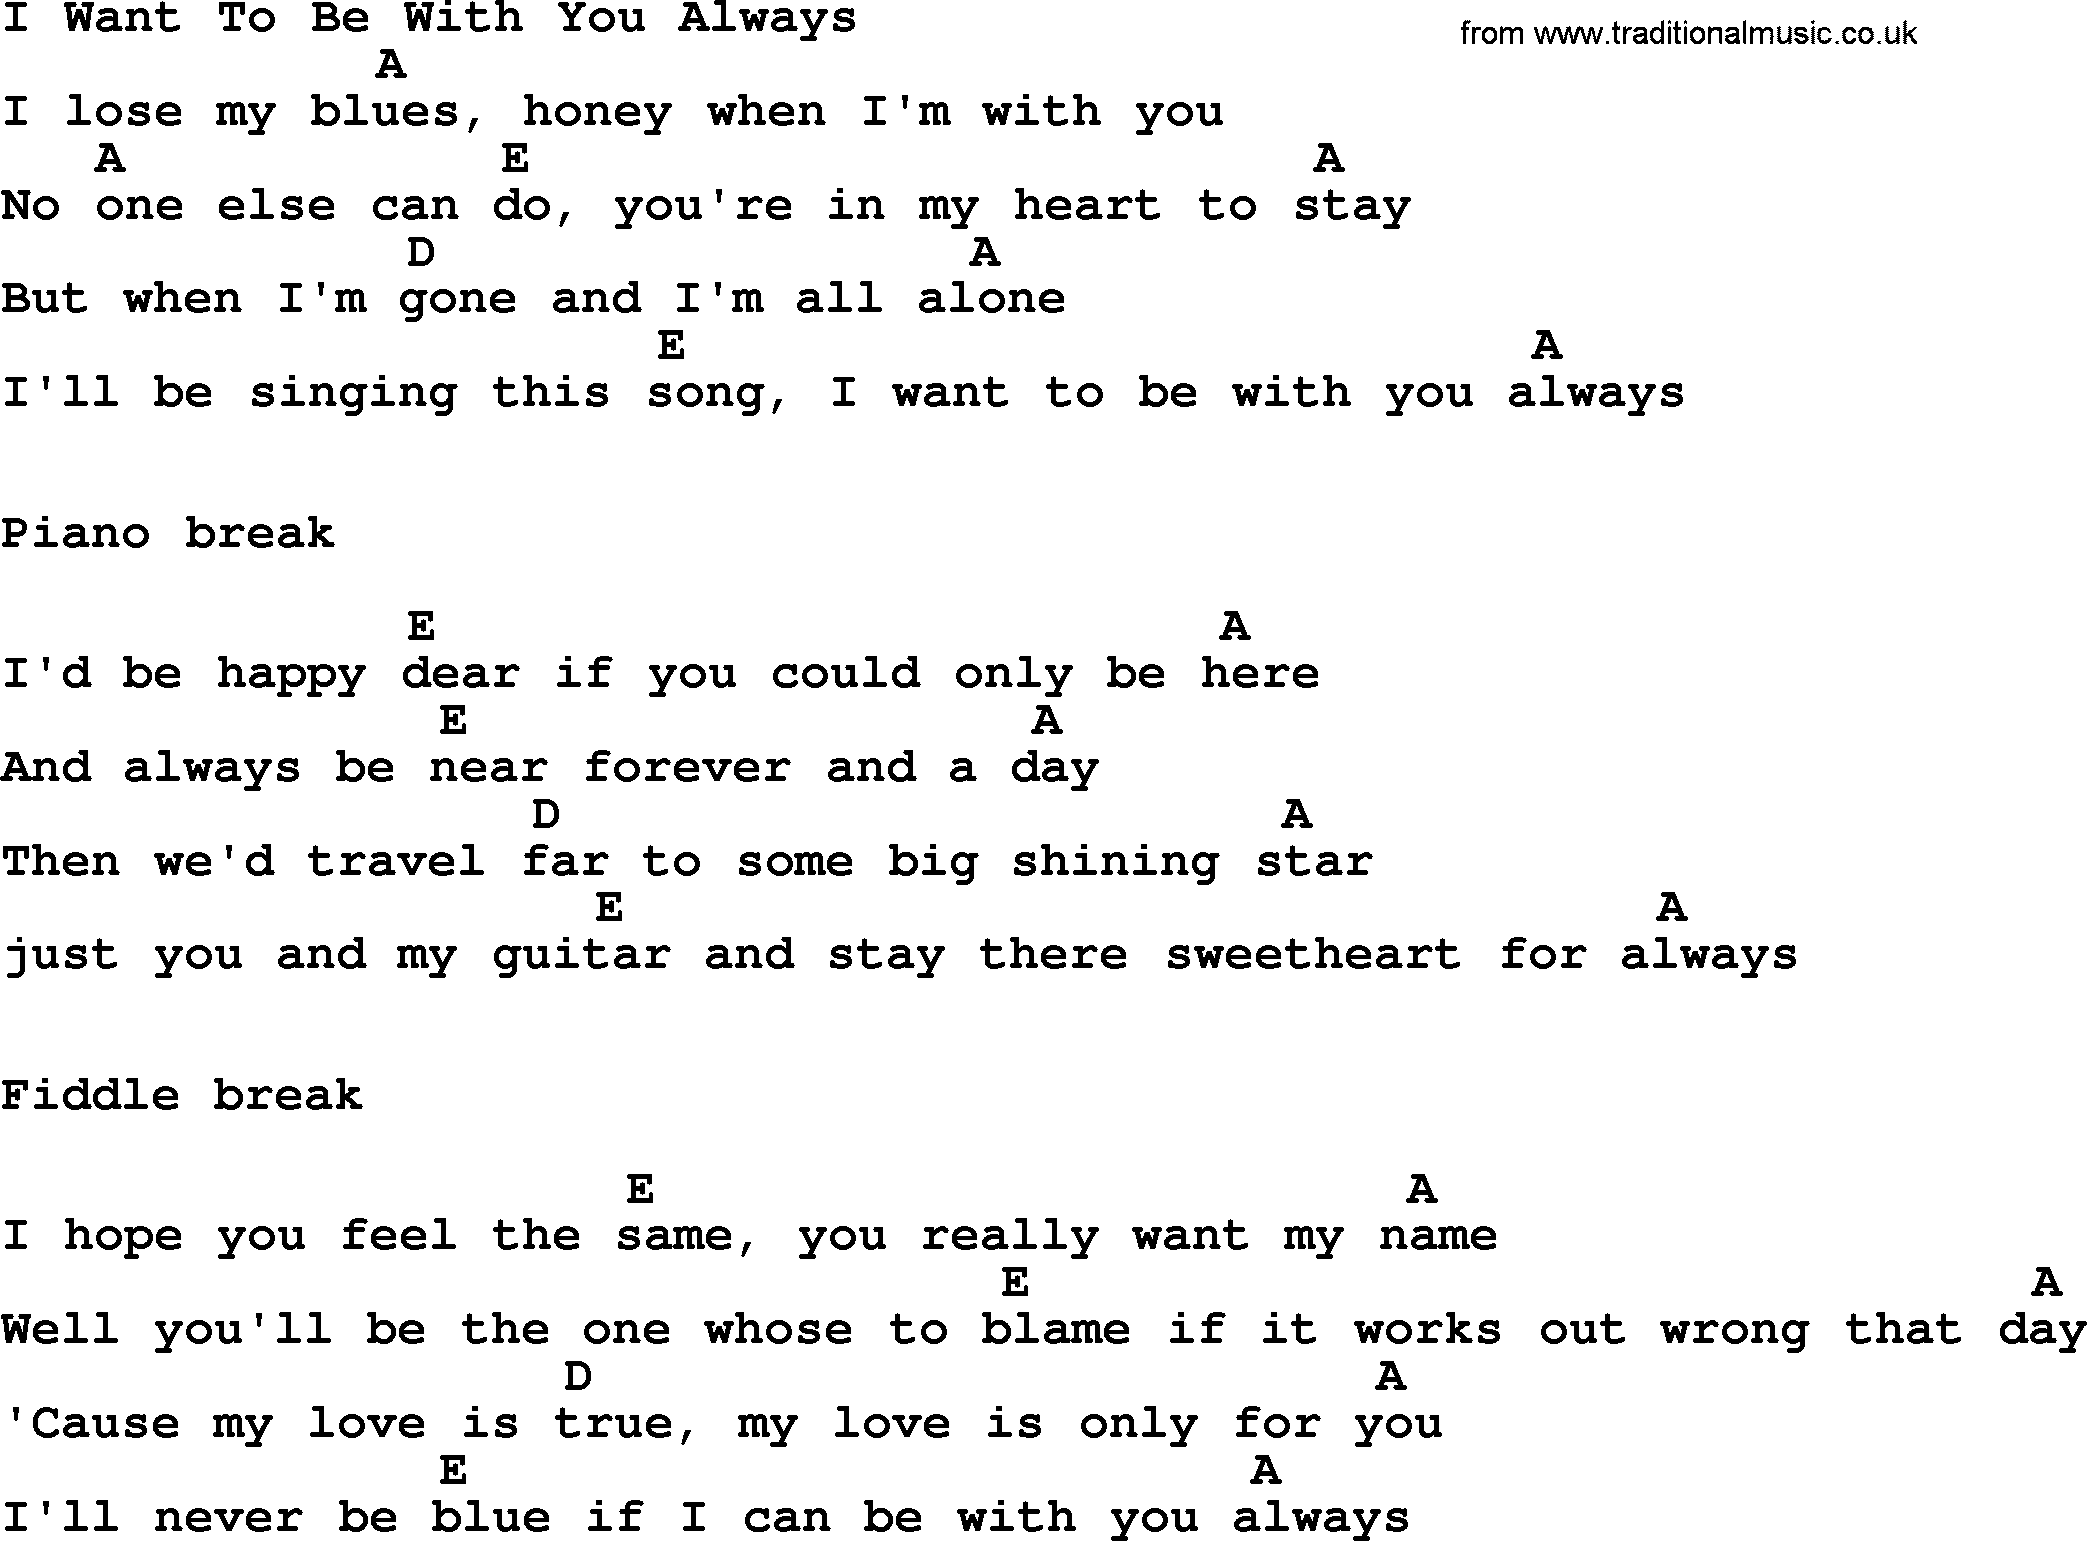 Bluegrass song: I Want To Be With You Always, lyrics and chords